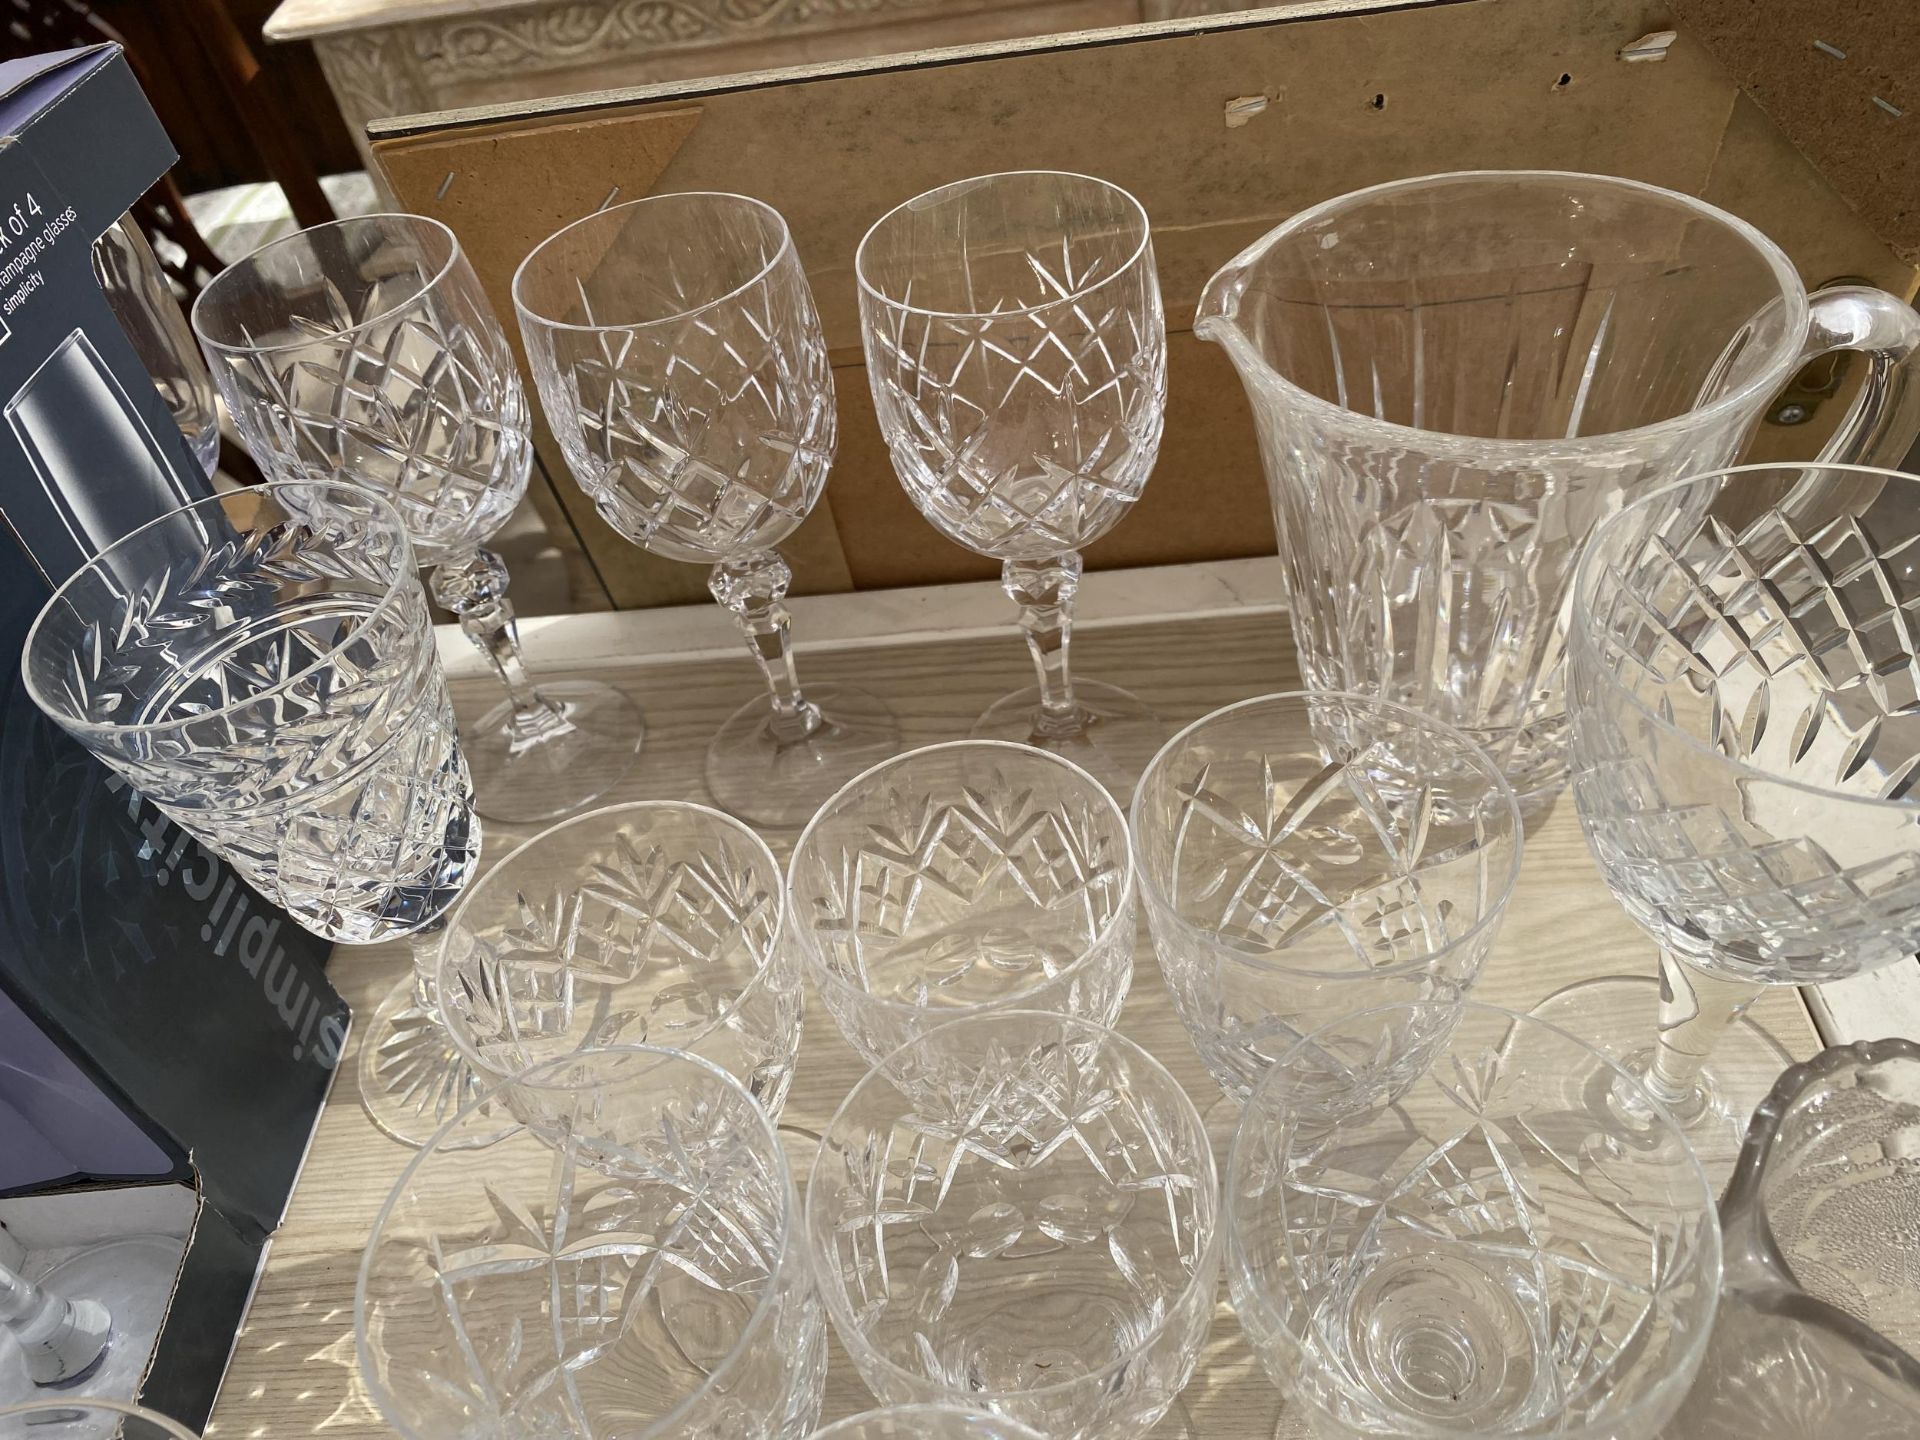 A LARGE QUANTITY OF ASSORTED GLASS WARE TO INCLUDE CHAMPAGNE FLUTES, WHISKET TUMBLERS AND WINE - Image 6 of 8